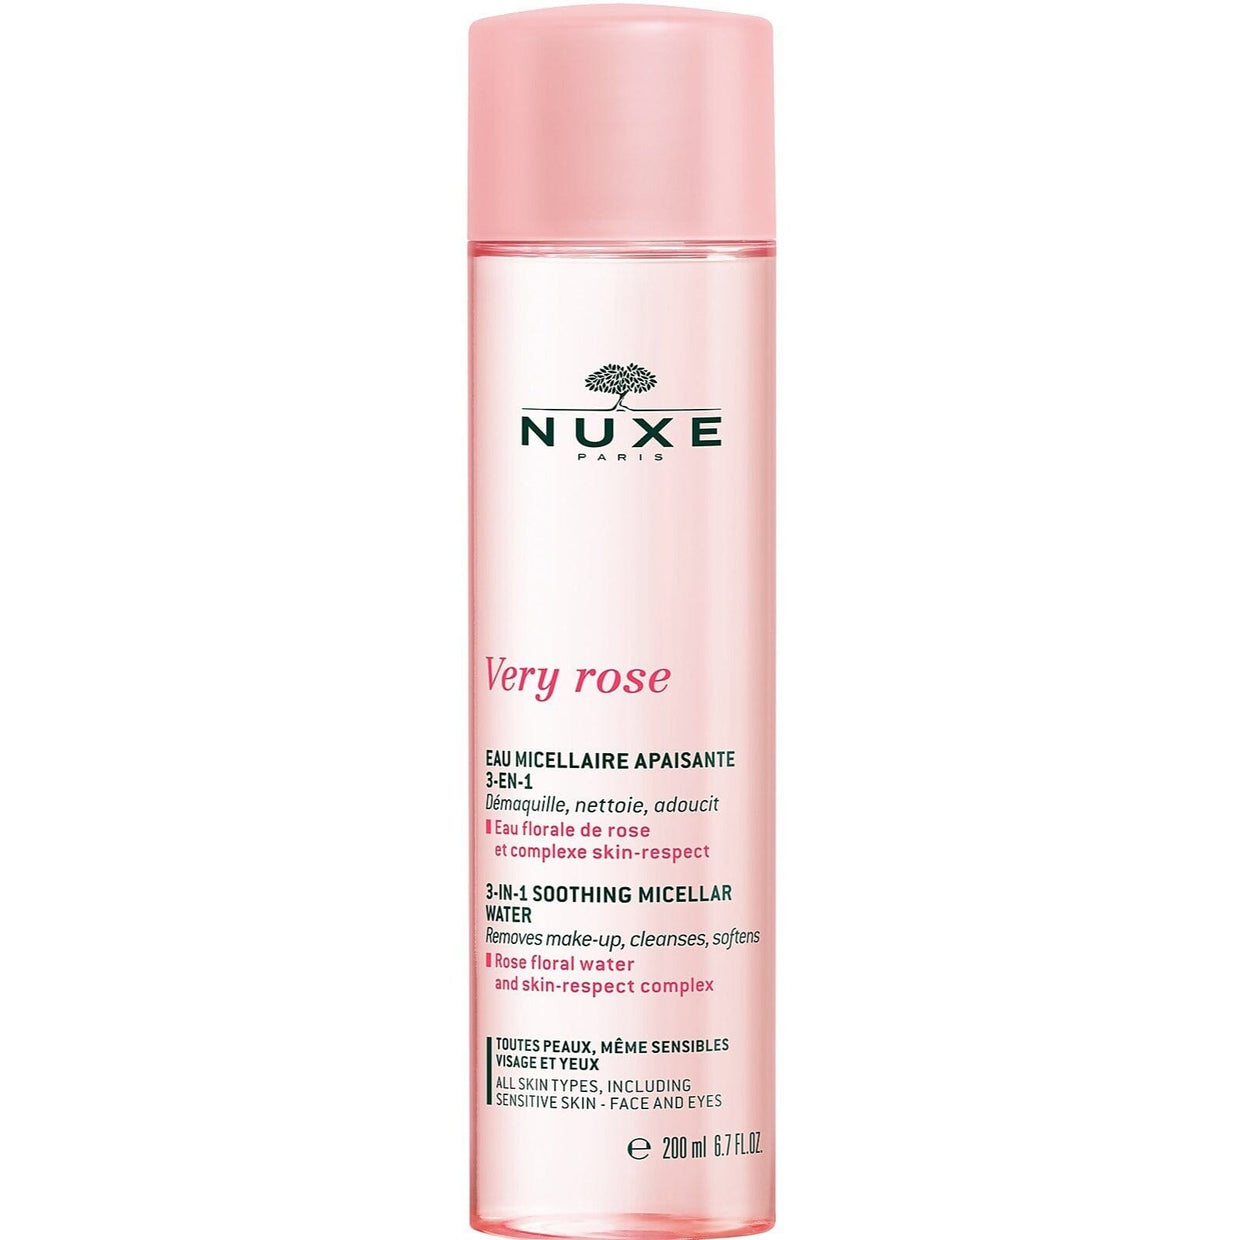 Nuxe Very Rose 3-in-1 Soothing Micellar Water Nuxe 6.7 fl. oz. (200ml) Shop at Exclusive Beauty Club